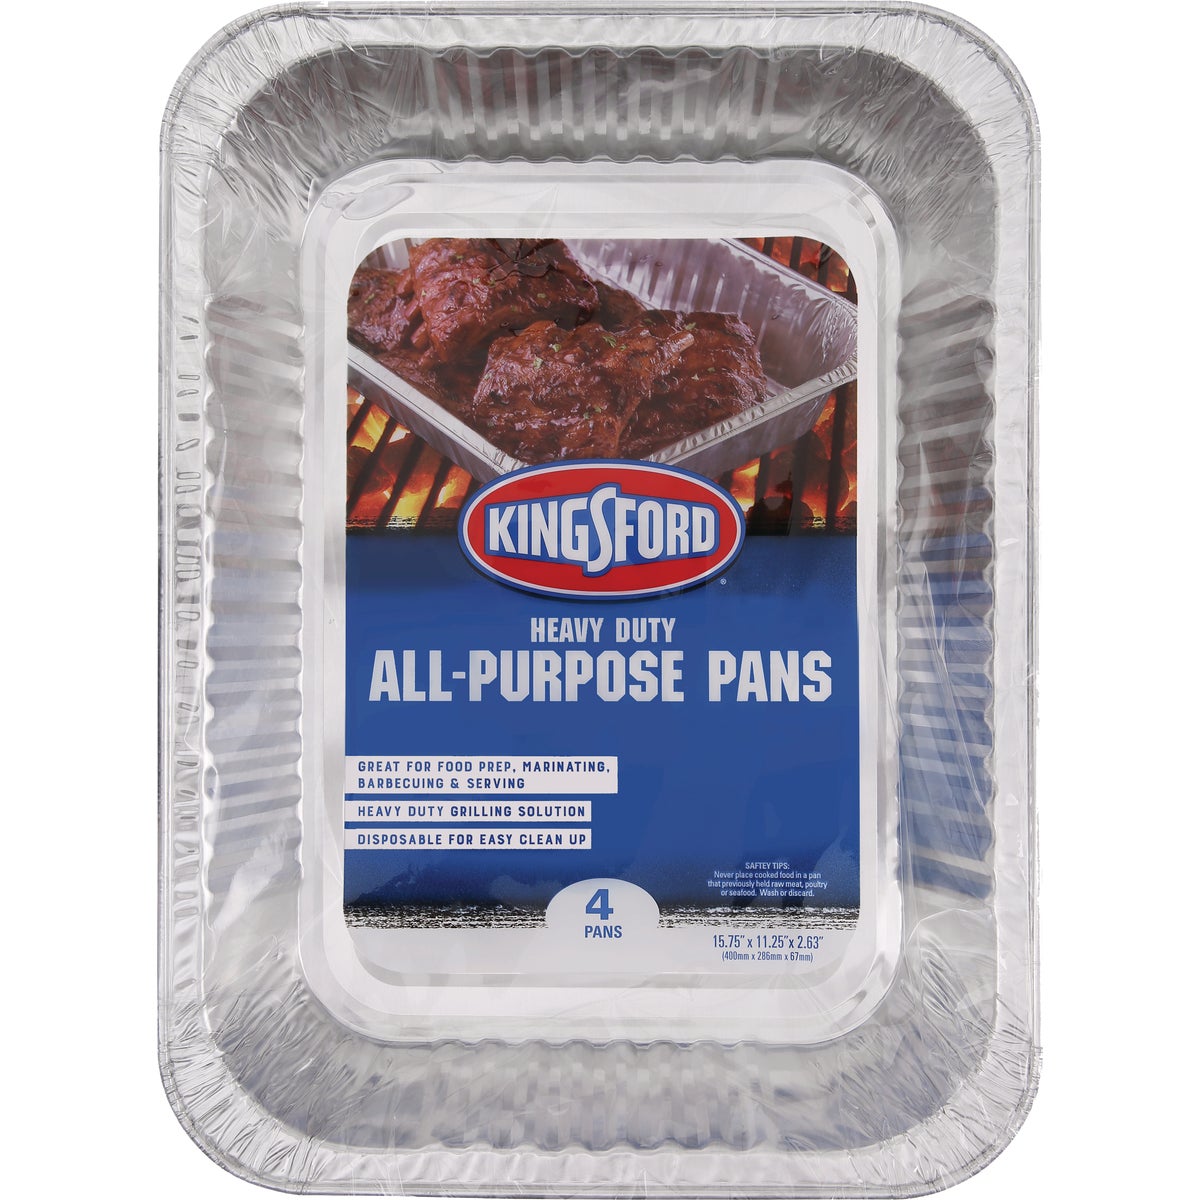 Kingsford Aluminum 11.25 In. W. x 15.75 In. L. All Purpose Grill Pan (4-Pack)